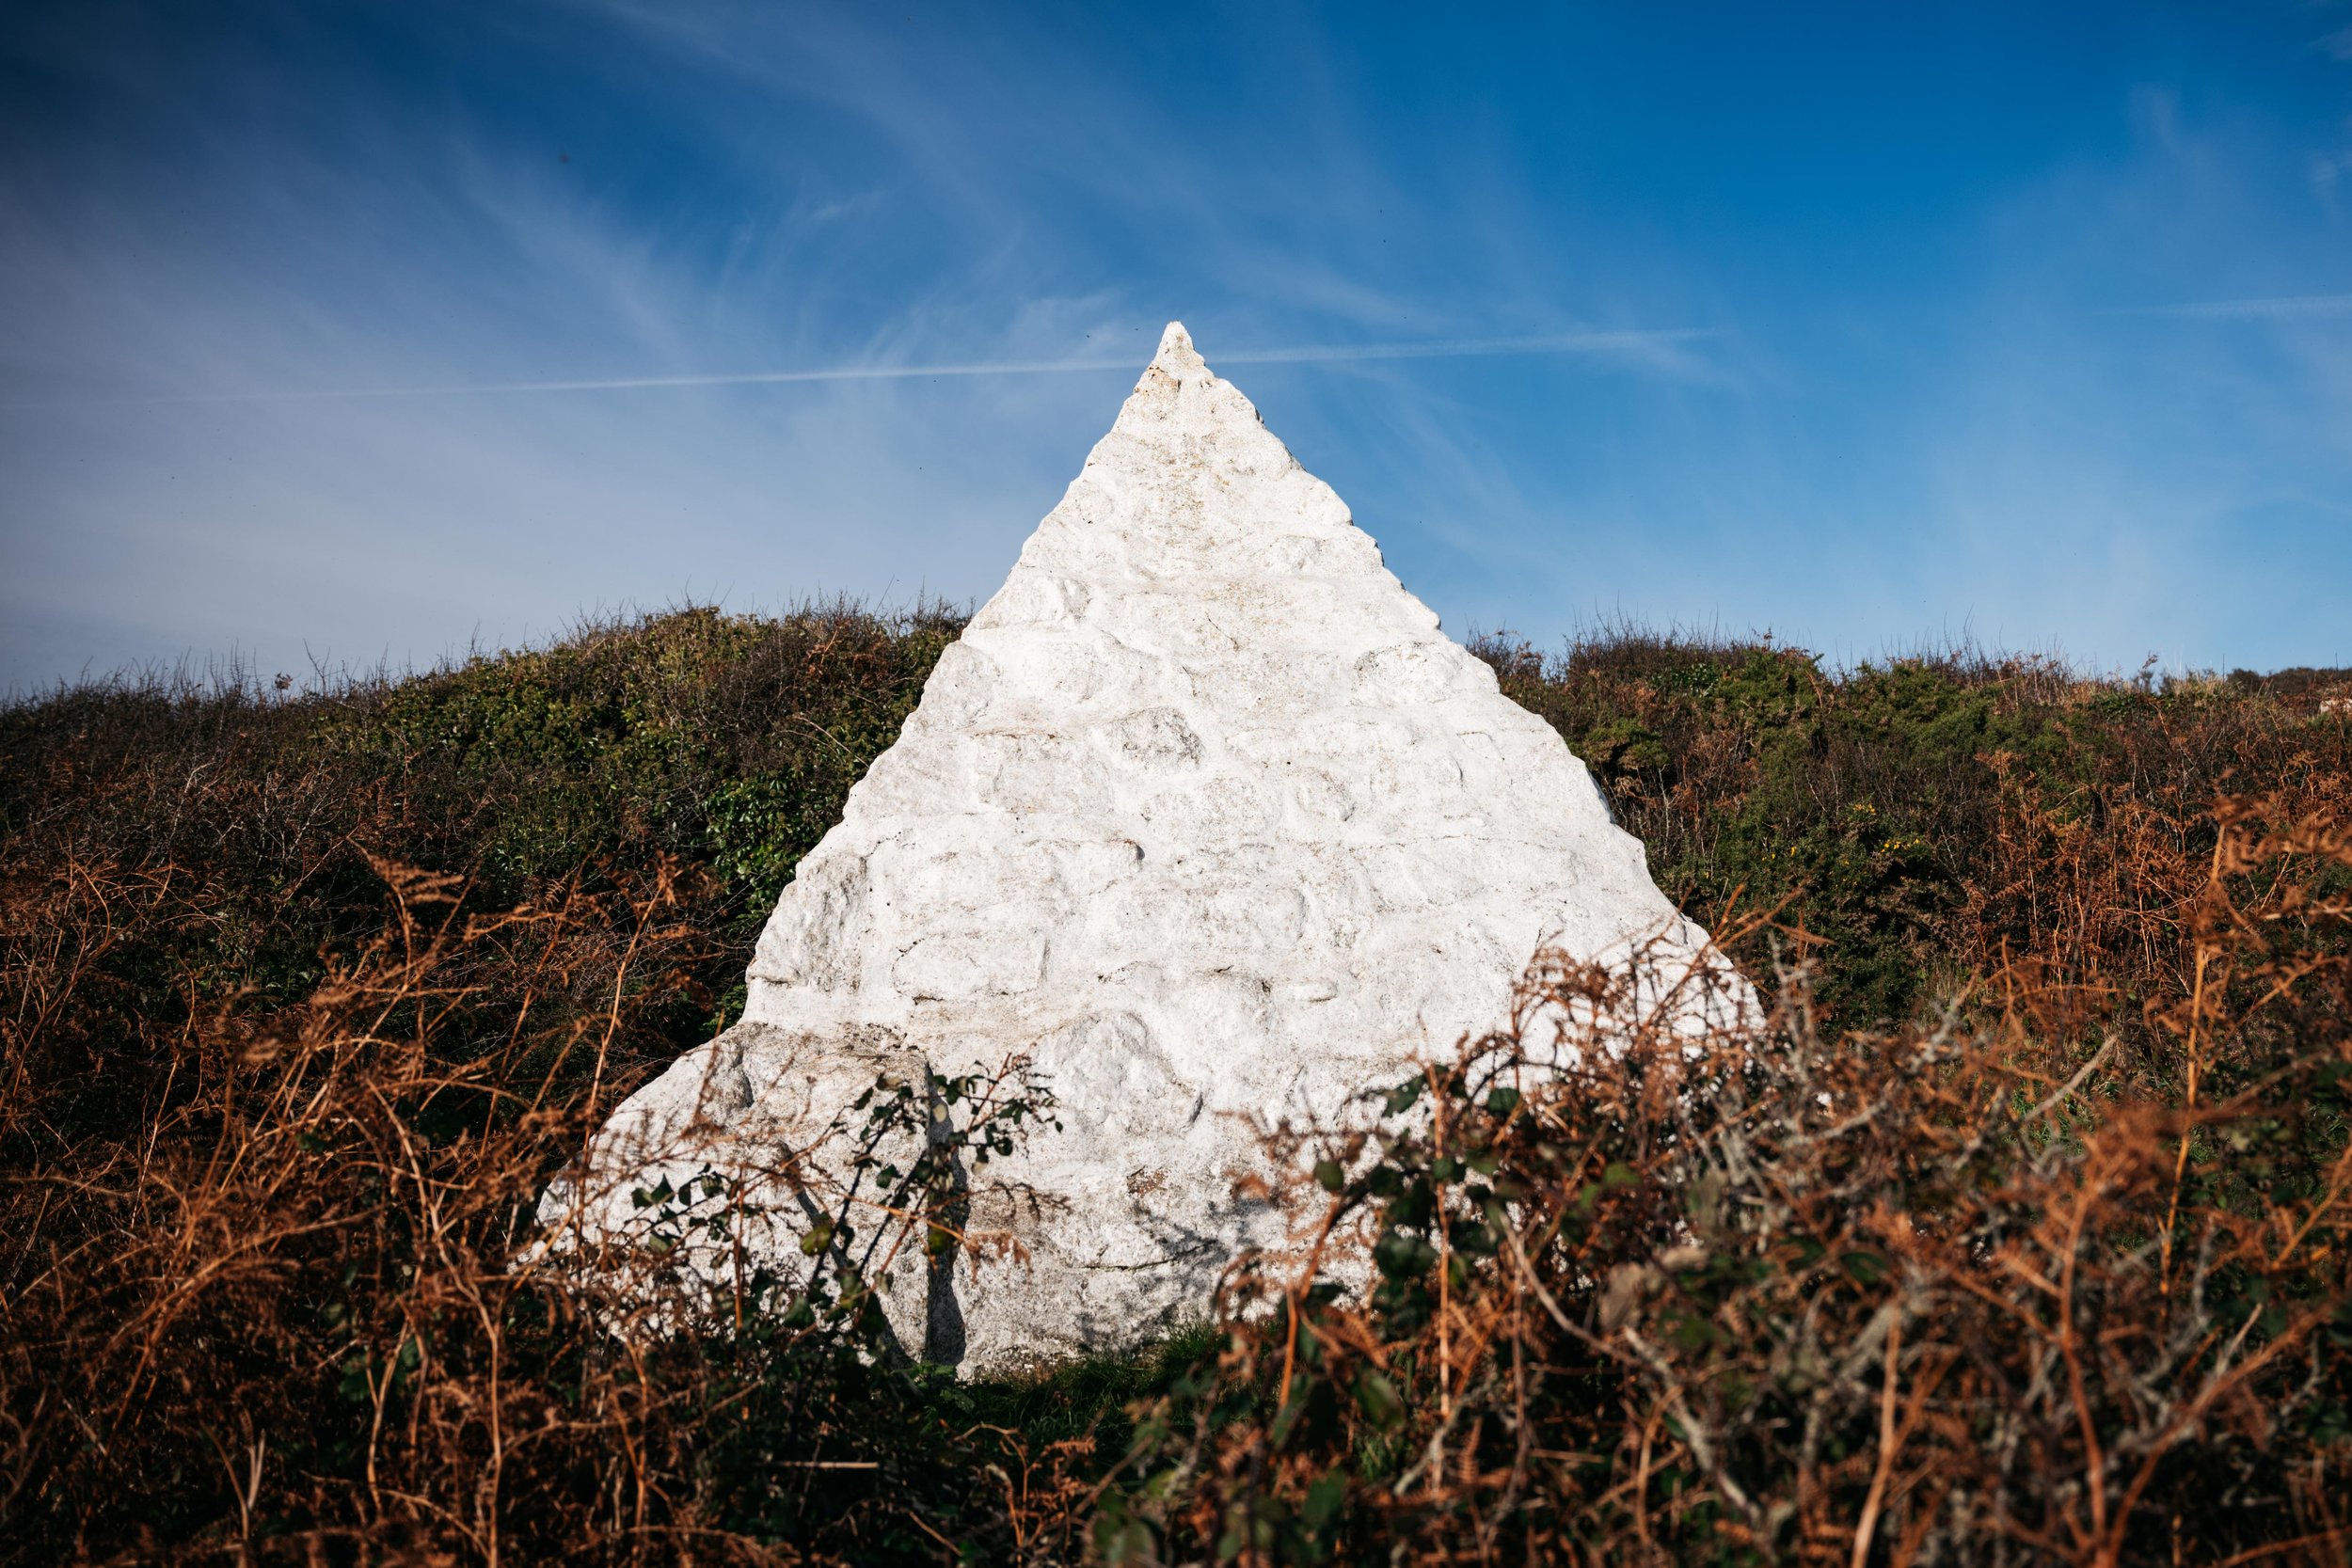  This small pyramid marks the spot where a submarine telegraph cable once connected England to America via France 